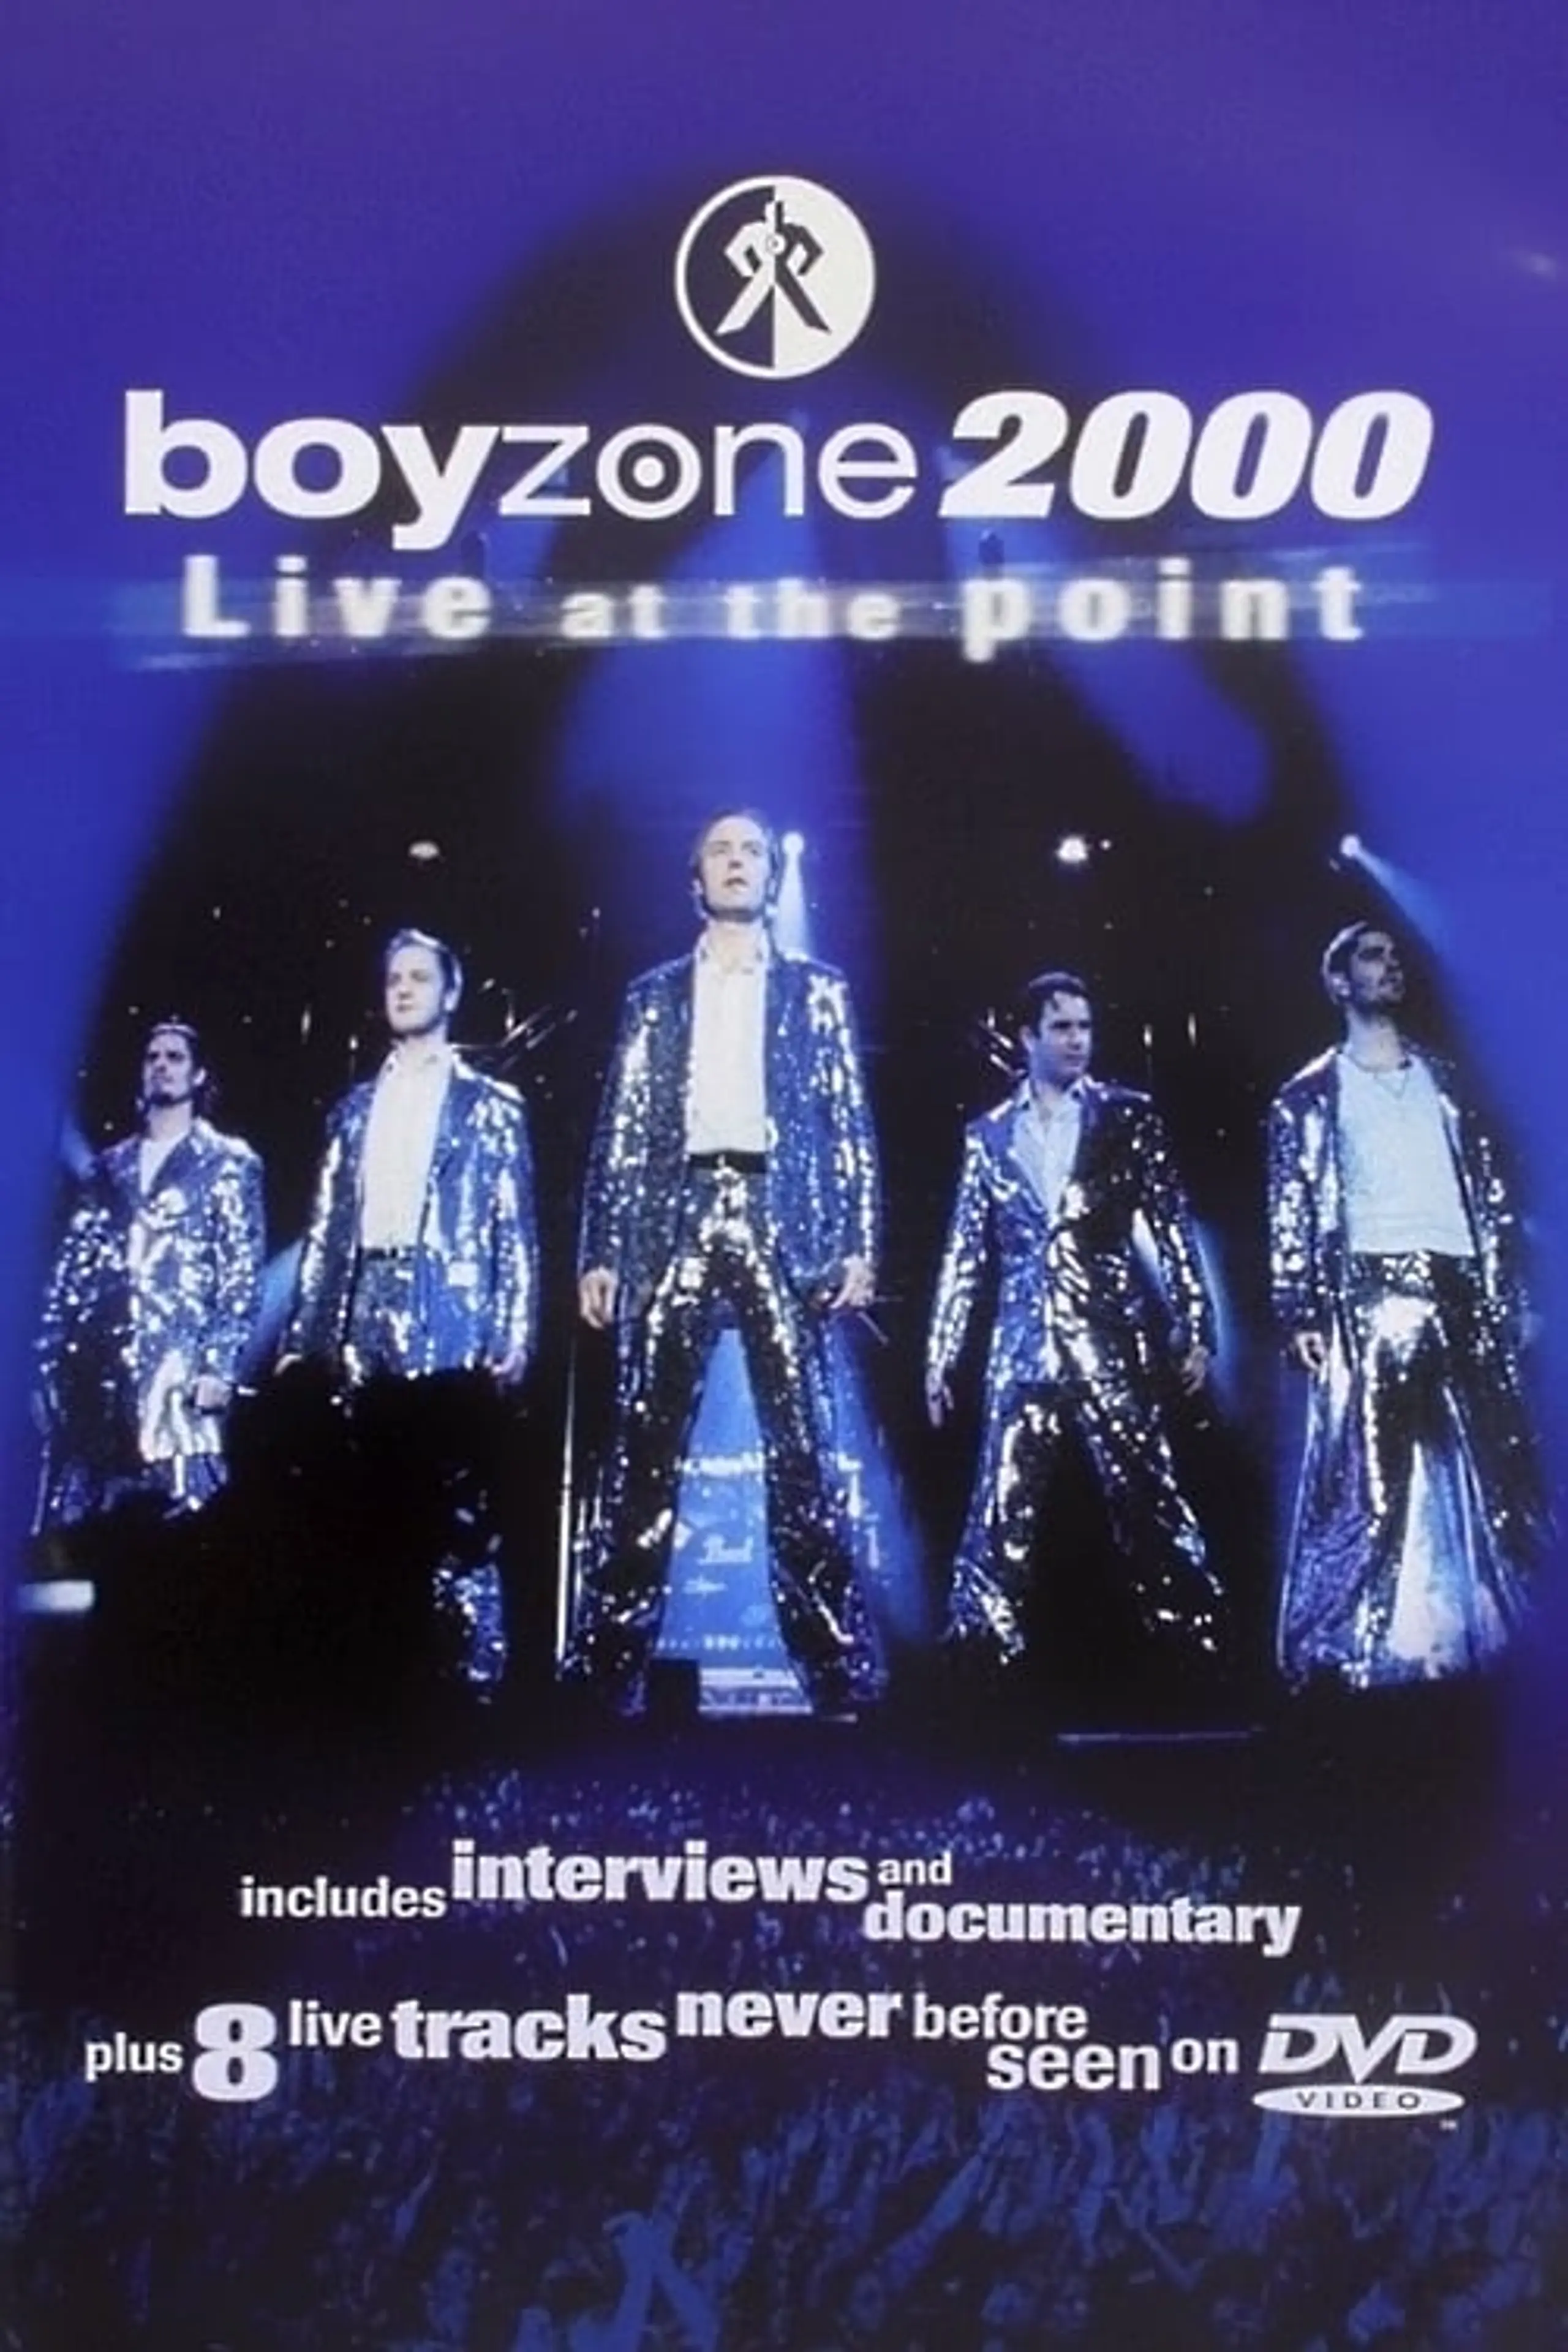 Boyzone: 2000 Live at the Point